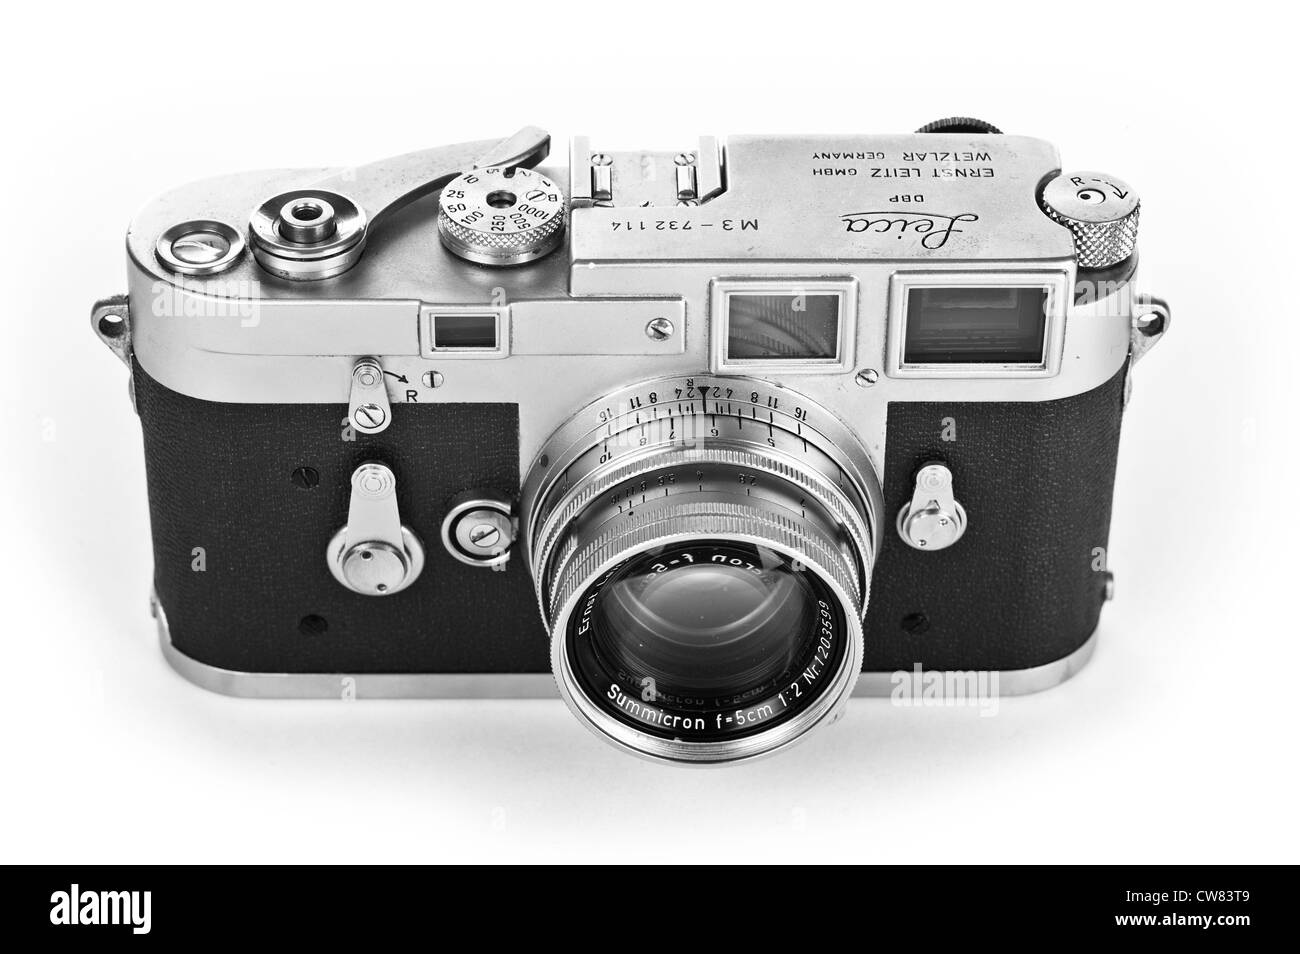 Leica M3 Leitz Rangefinder camera on White Background with Collapsible Summicron 50mm f2 M Lens B & W Stock Photo